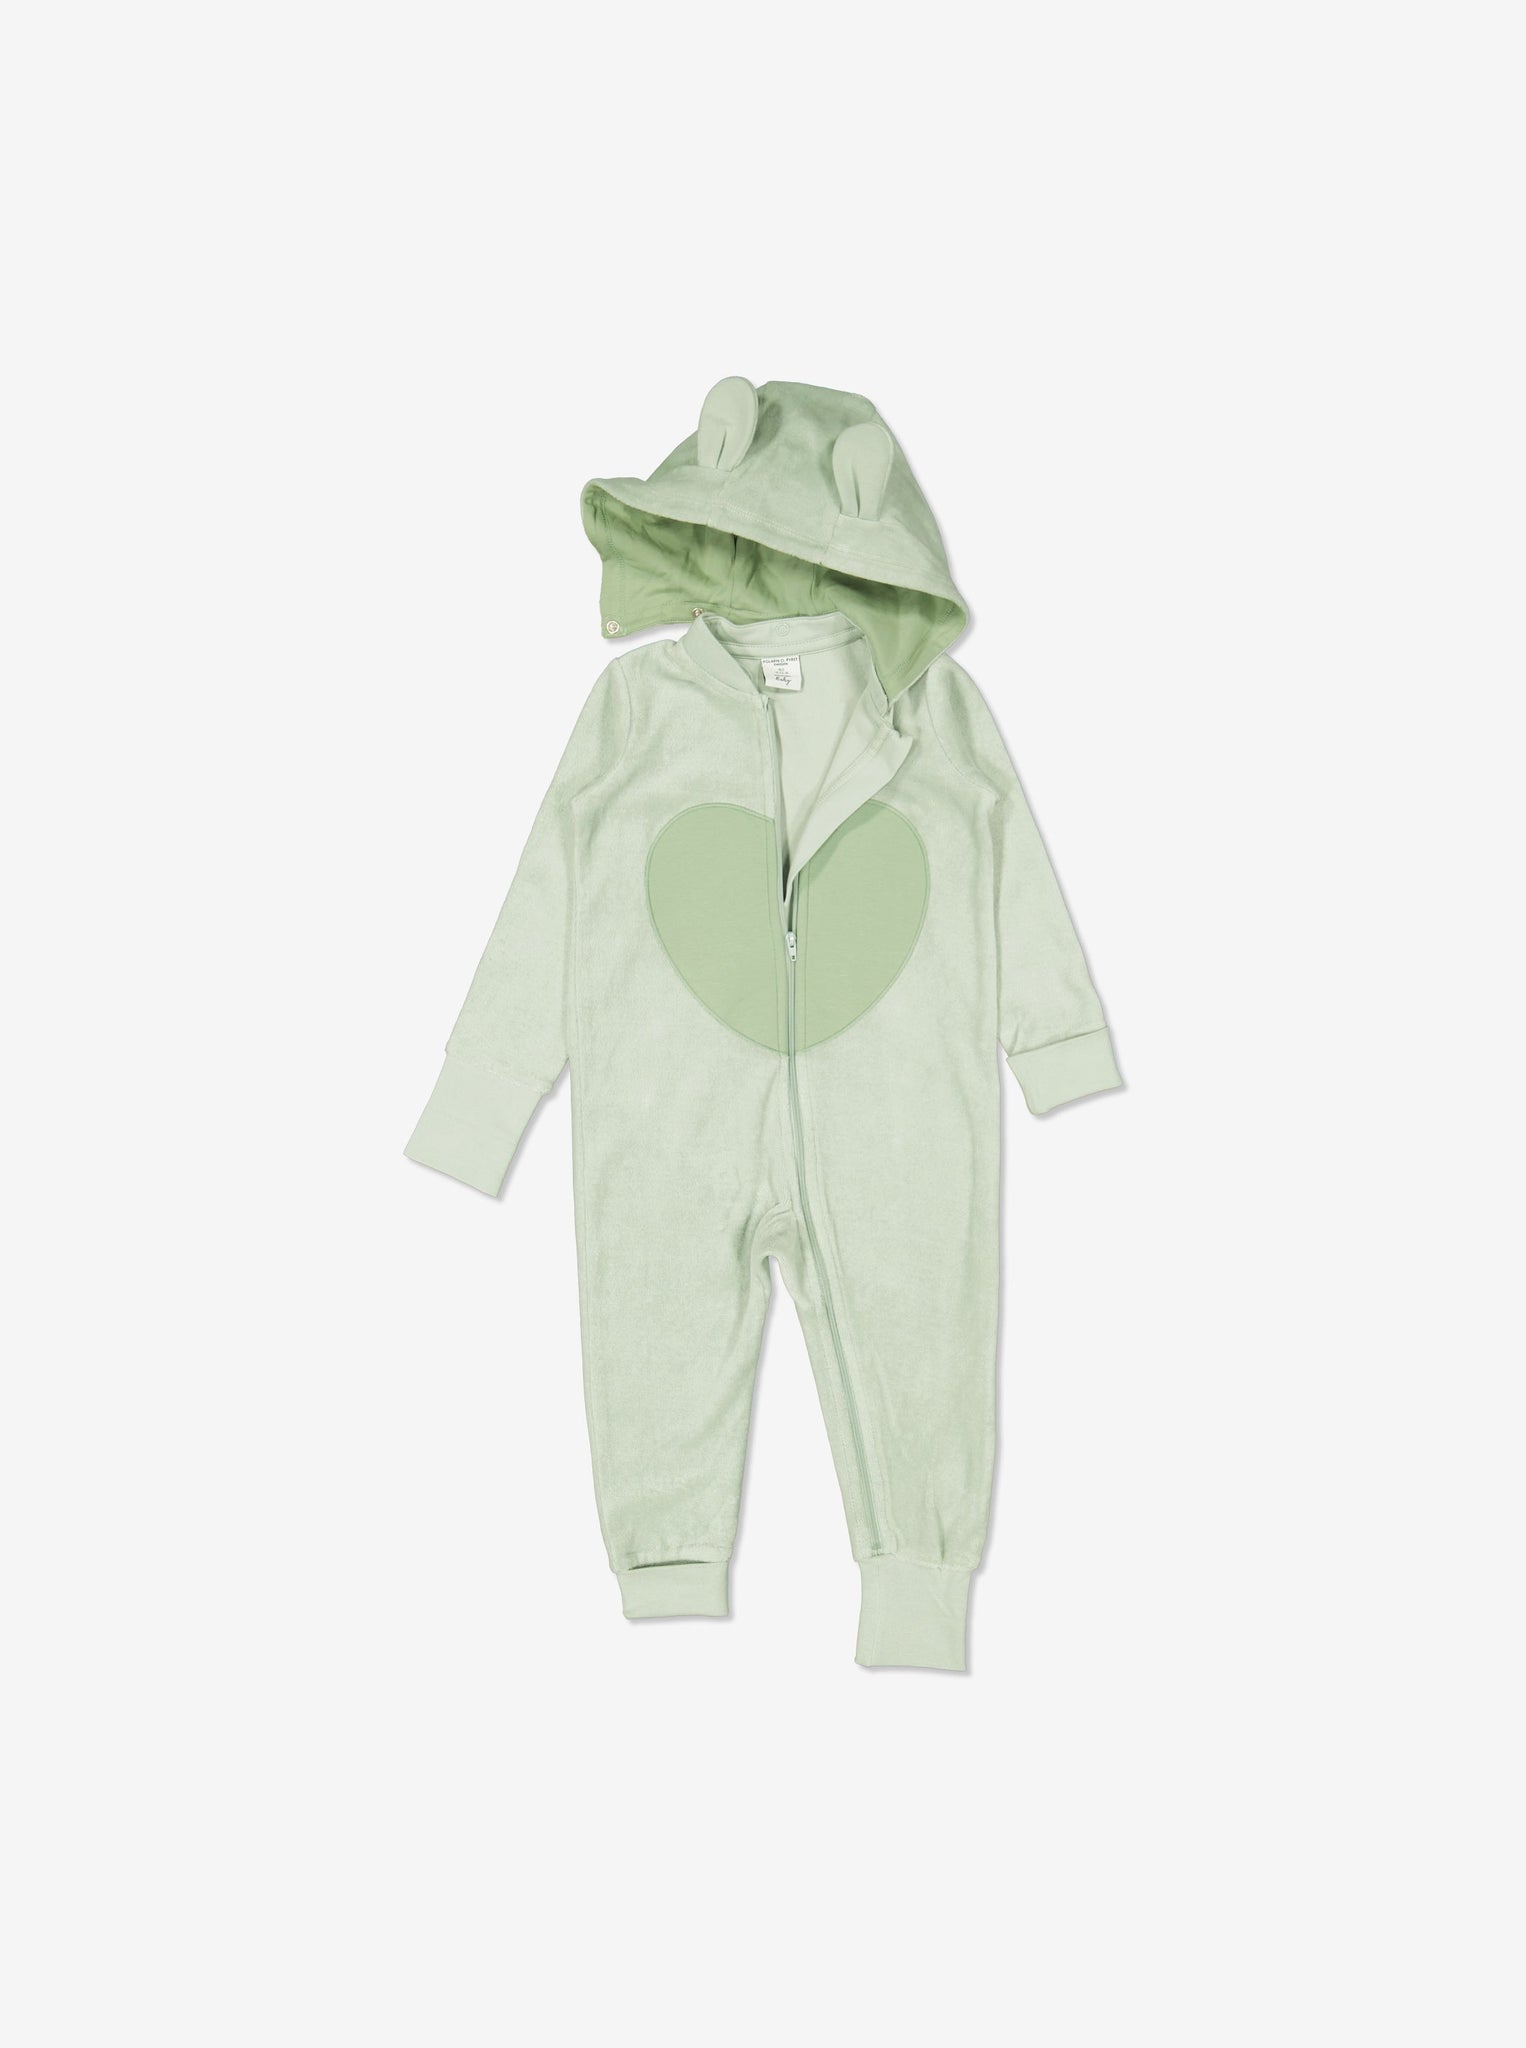  Heart Print Grey Baby All In One from Polarn O. Pyret Kidswear. Made from sustainable materials.